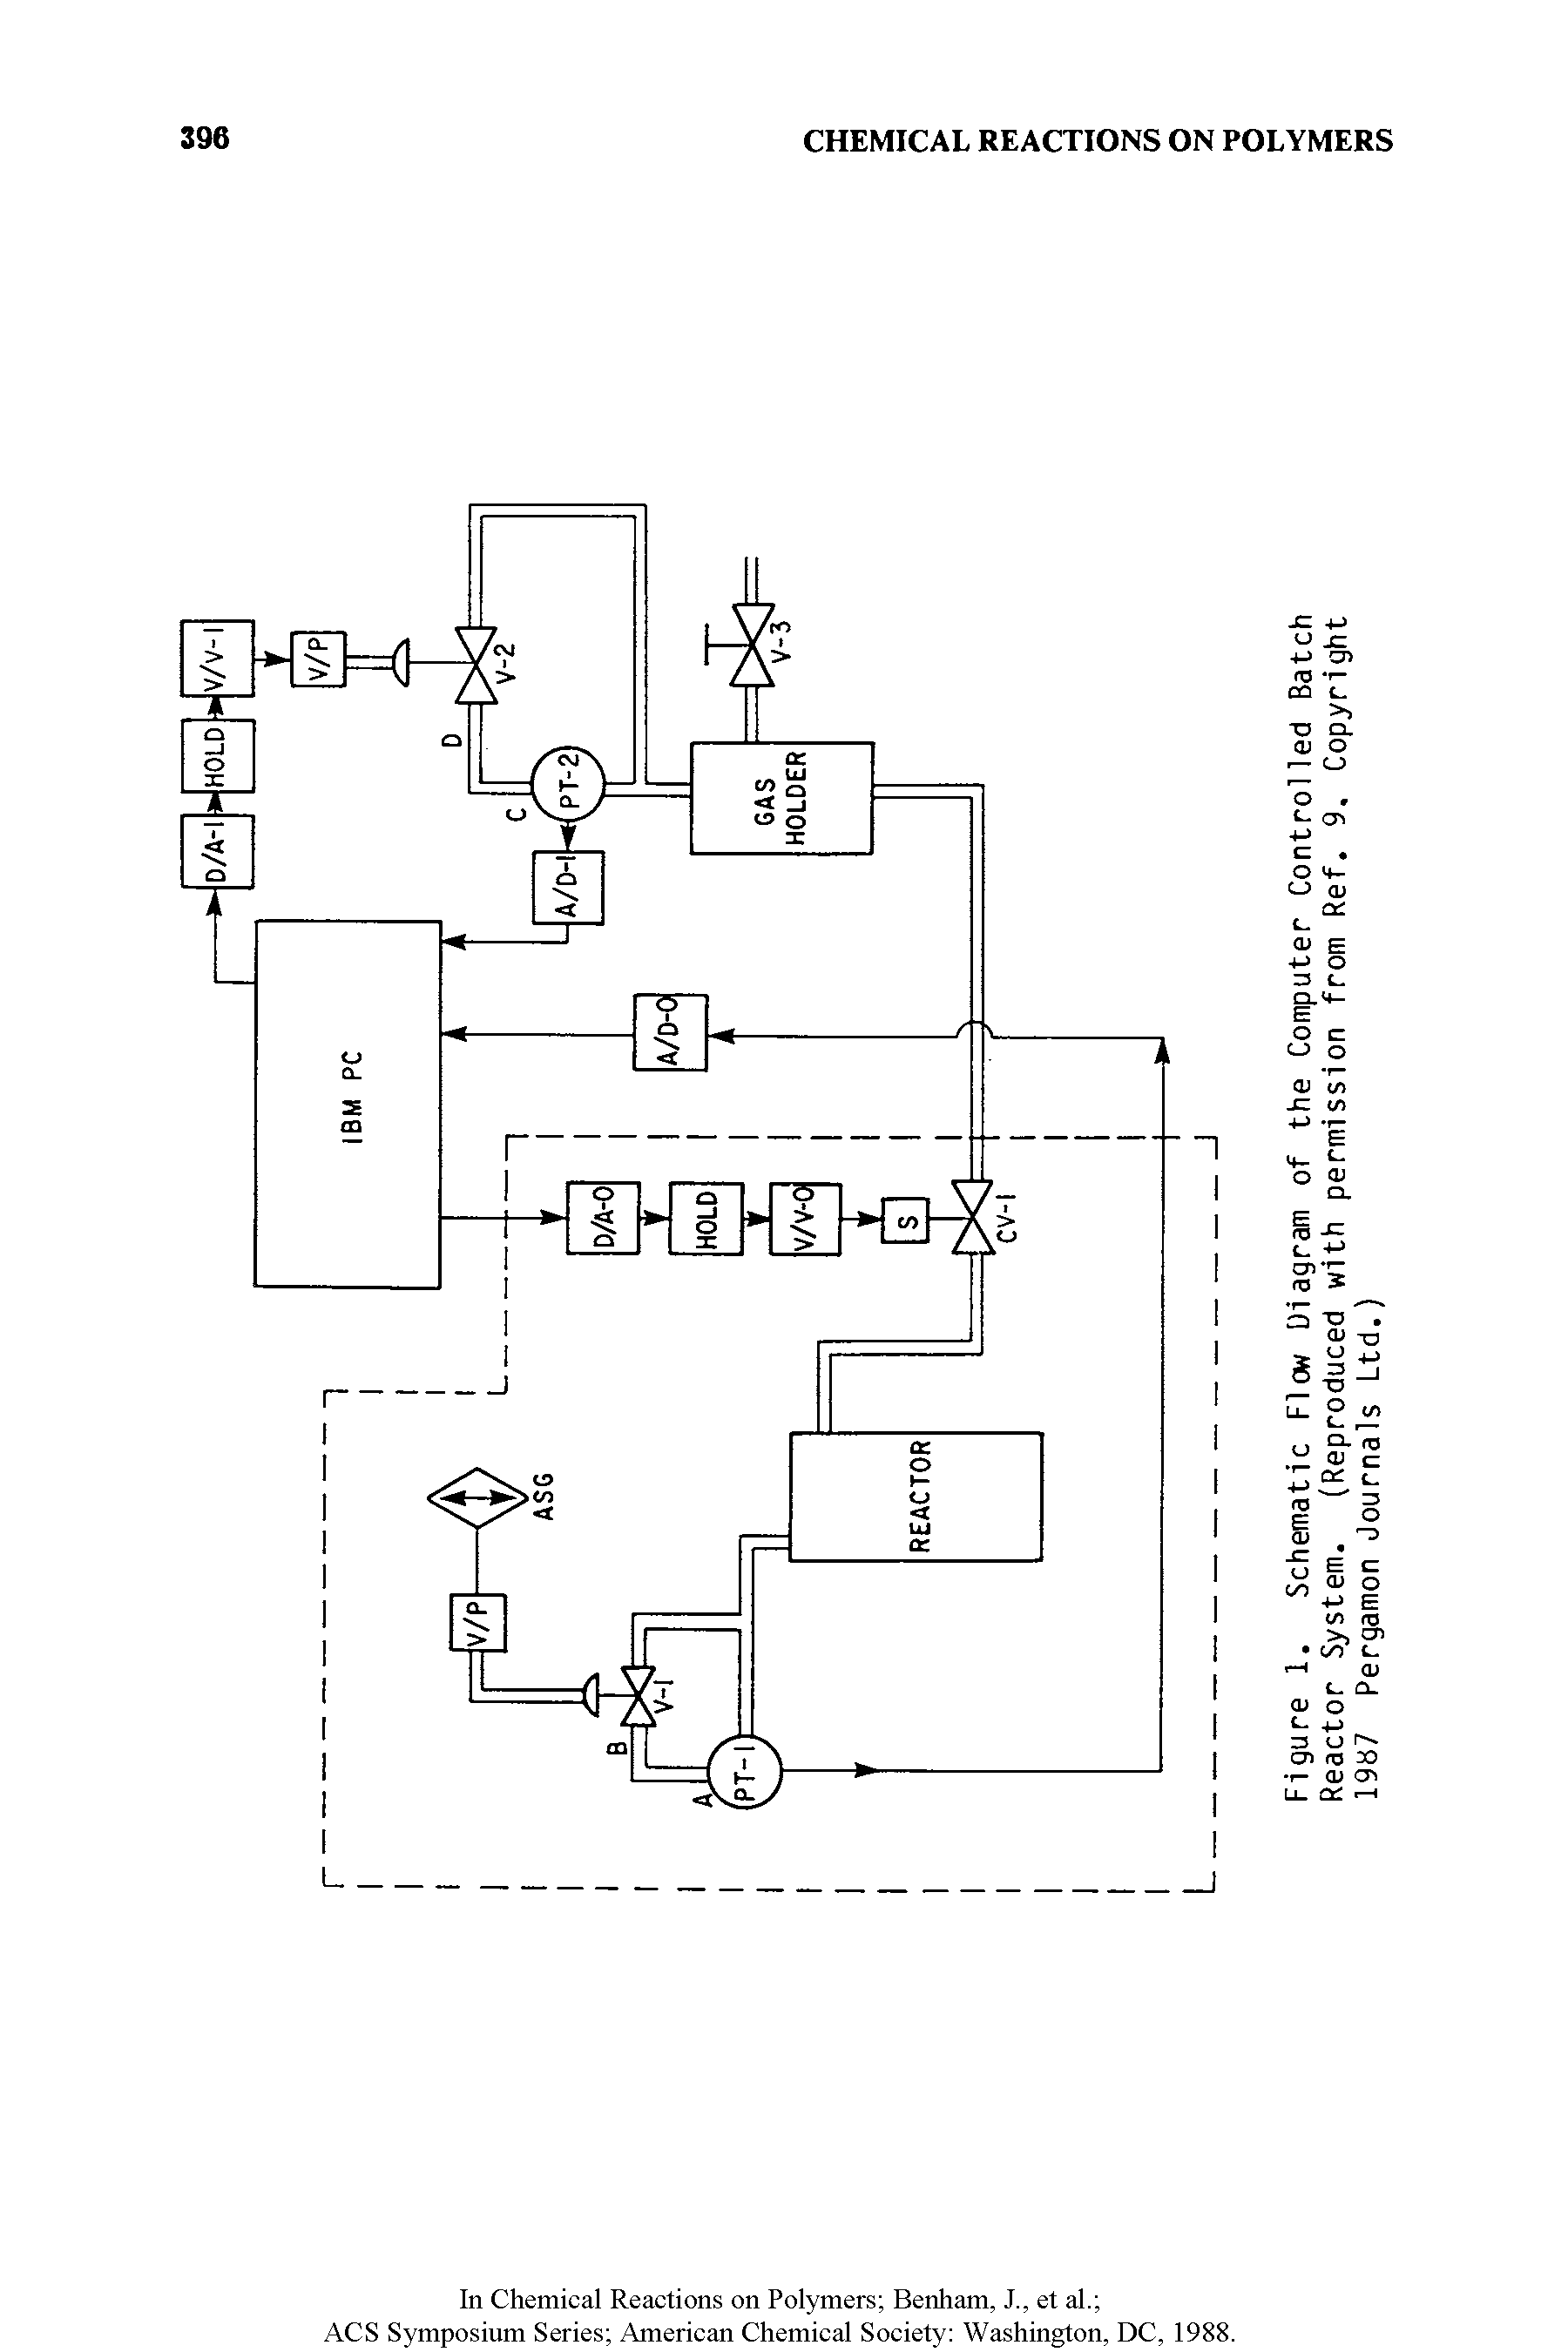 Figure 1. Schematic Flow Diagram of the Computer Controlled Batch Reactor System. (Reproduced with permission from Ref. 9. Copyright 1987 Pergamon Journals Ltd.)...